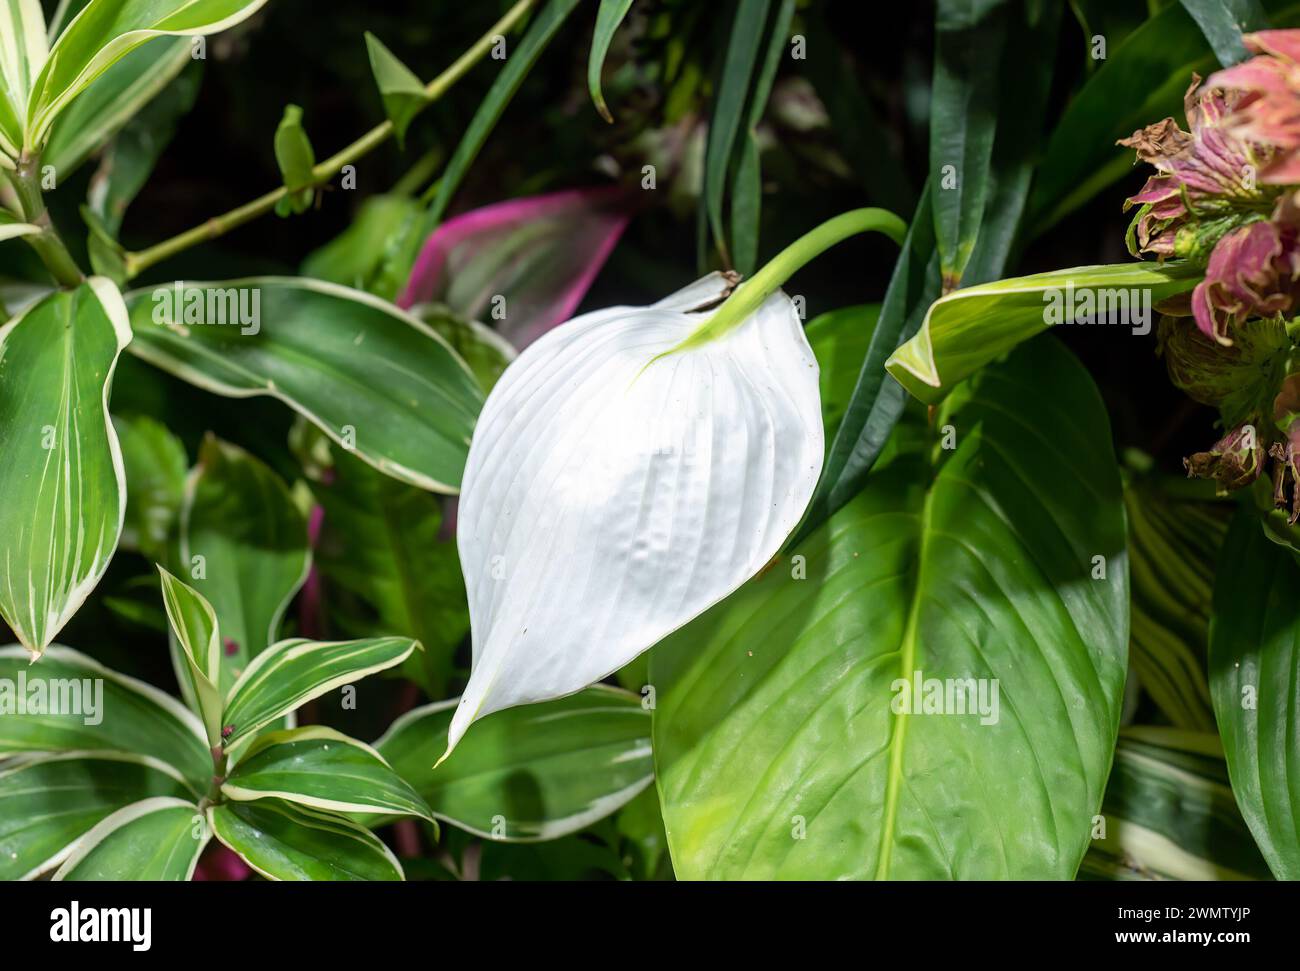 Spathiphyllum cochlearispathum commonly called peace lily growing in Vietnam Stock Photo